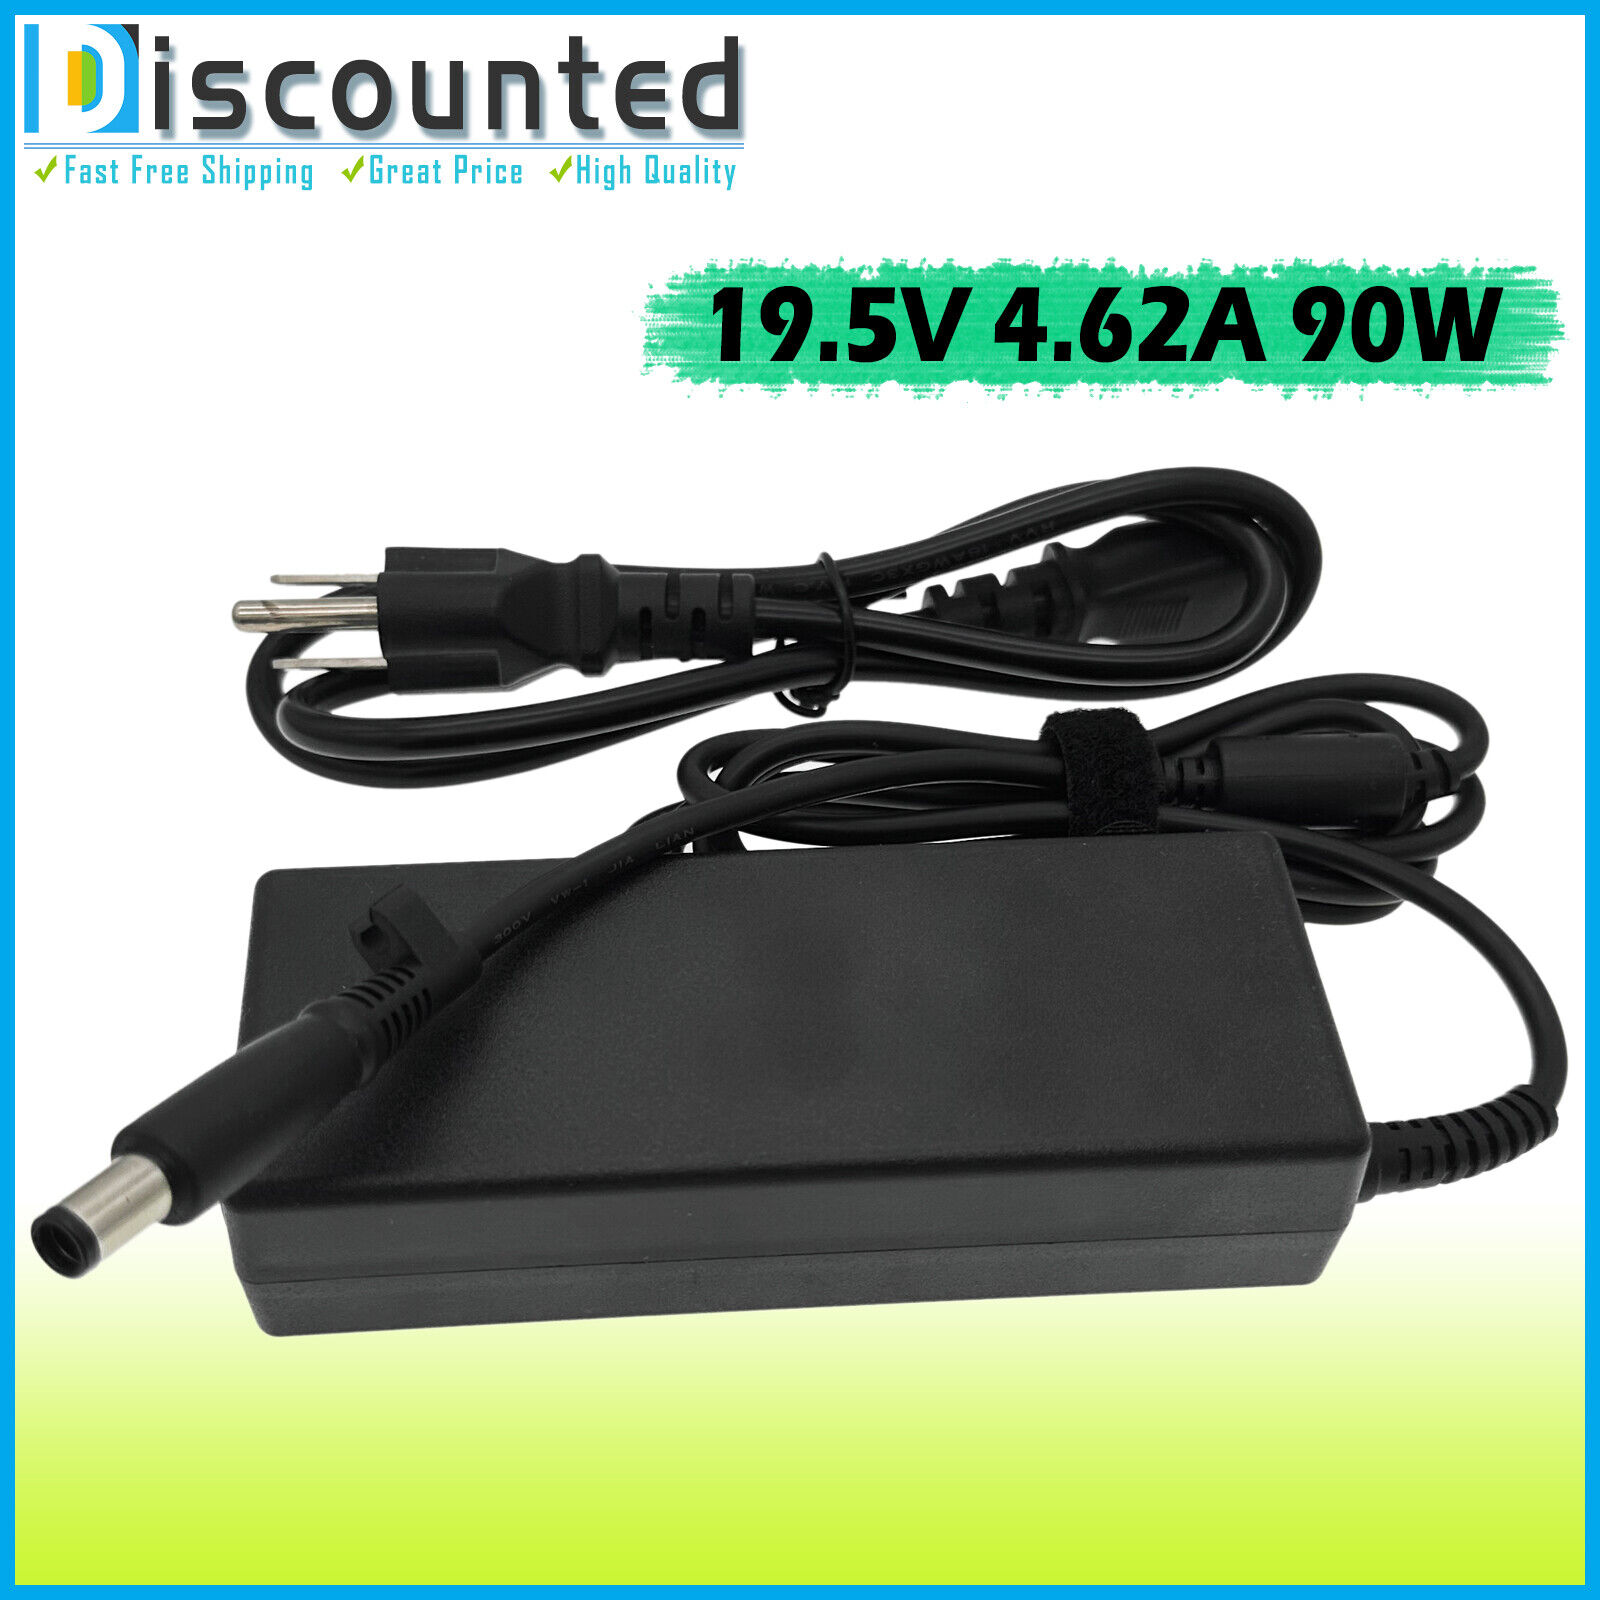 90W AC Adapter For HP Pavilion 23-q014 23-q116 23-q214 All-in-one Desktop